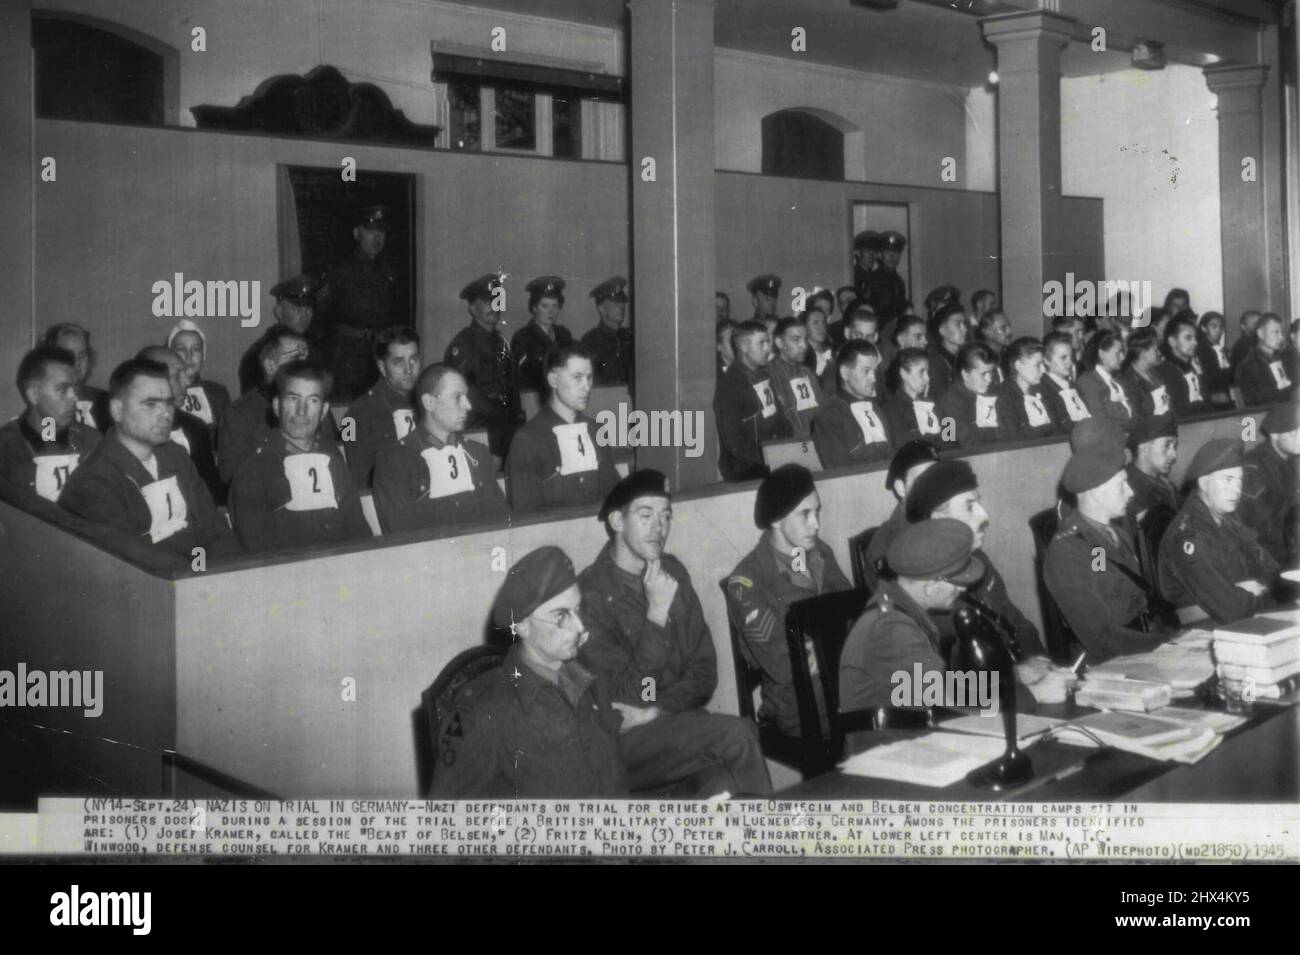 Nazis on Trial in Germany -- Nazi defendants on trial for crimes at the Oswiecin and Belsen concentration camps sit in prisoners dock during a session of the trial before a British Military court in Lueneberg, Germany. Among the prisoners identified are; (1) Josef Kramer, called the 'Beast of Belsen,' (2) Fritz Klein, (3) Peter Weingartner. At lower left center is Maj. T.C. Winwood, defense counsel for Kramer and three other defendants. September 24, 1945. (Photo by Peter J. Carroll, AP Wirephoto). Stock Photo